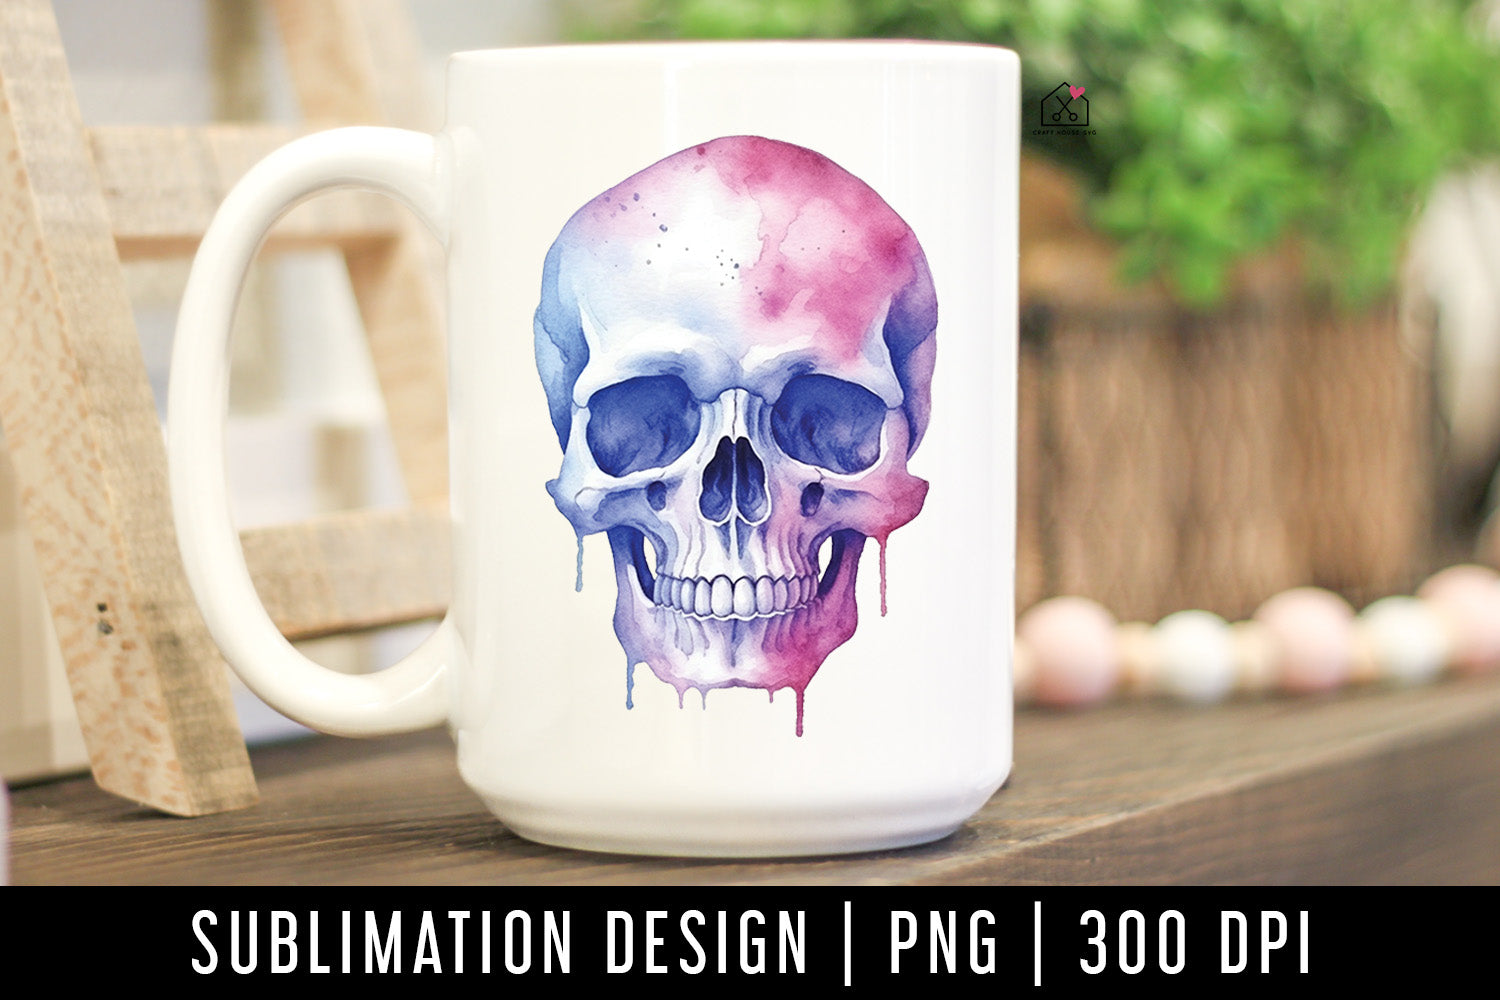 FREE Watercolor Pastel Skull Sublimation Design Halloween PNG